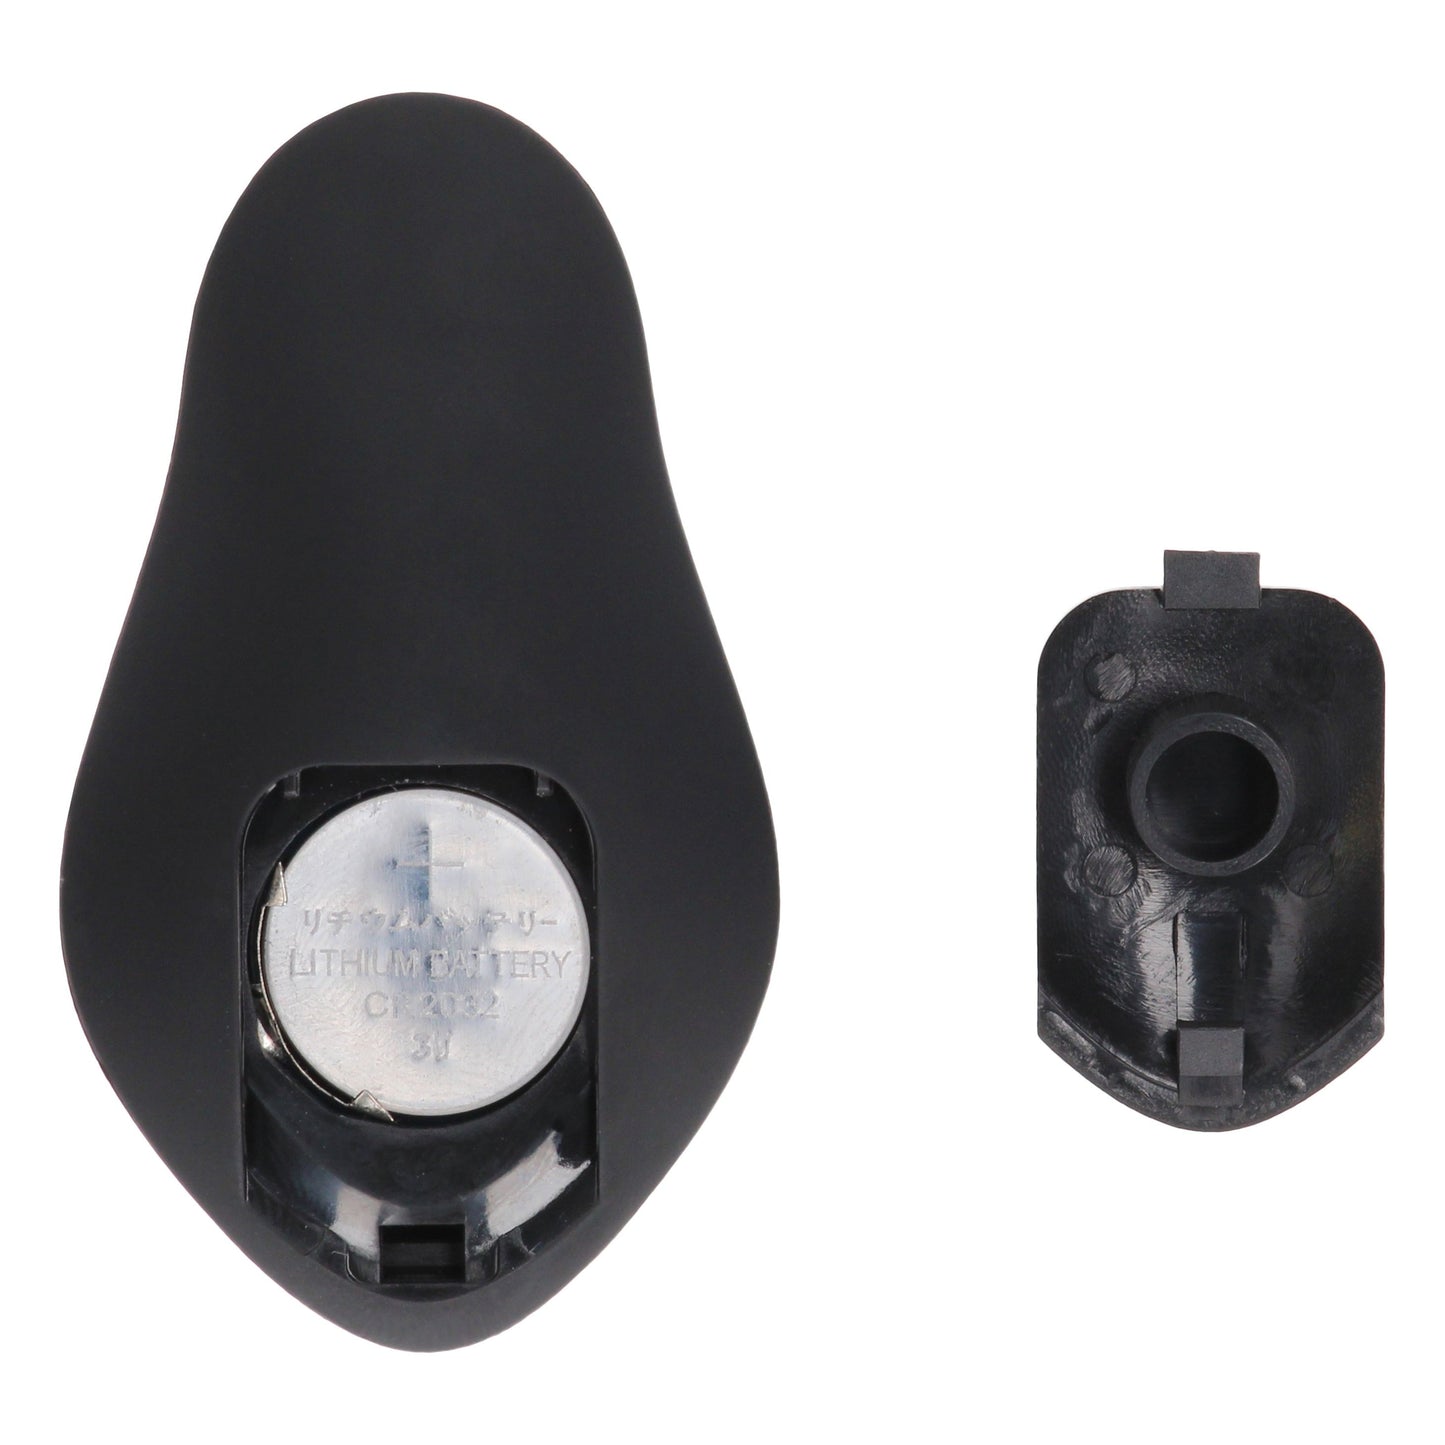 E-Stimulation and Vibration Butt Plug With Cock Ring and Wireless Remote Control - Black